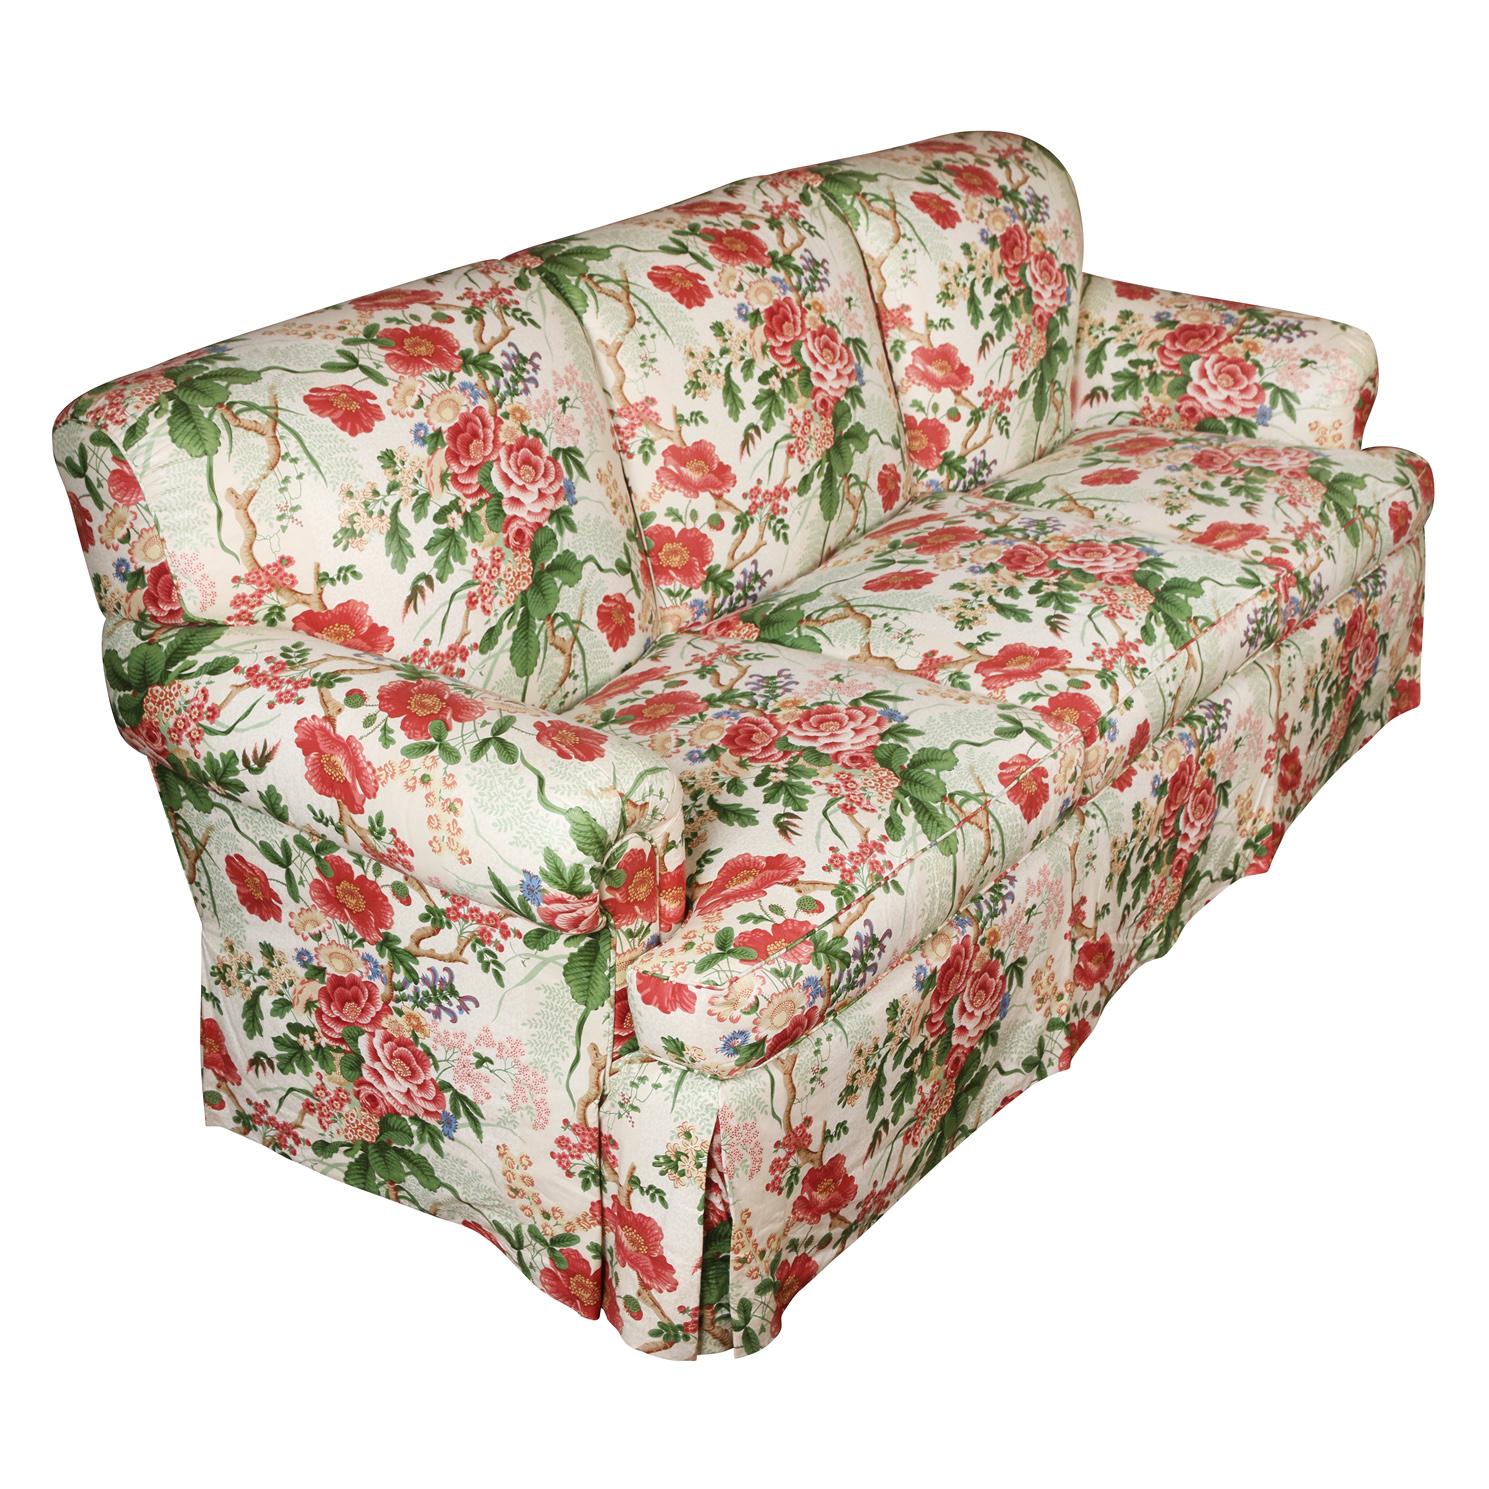 Cowtan & Tout upholstered floral three cushion, roll arm English sofa in red, pink and green.